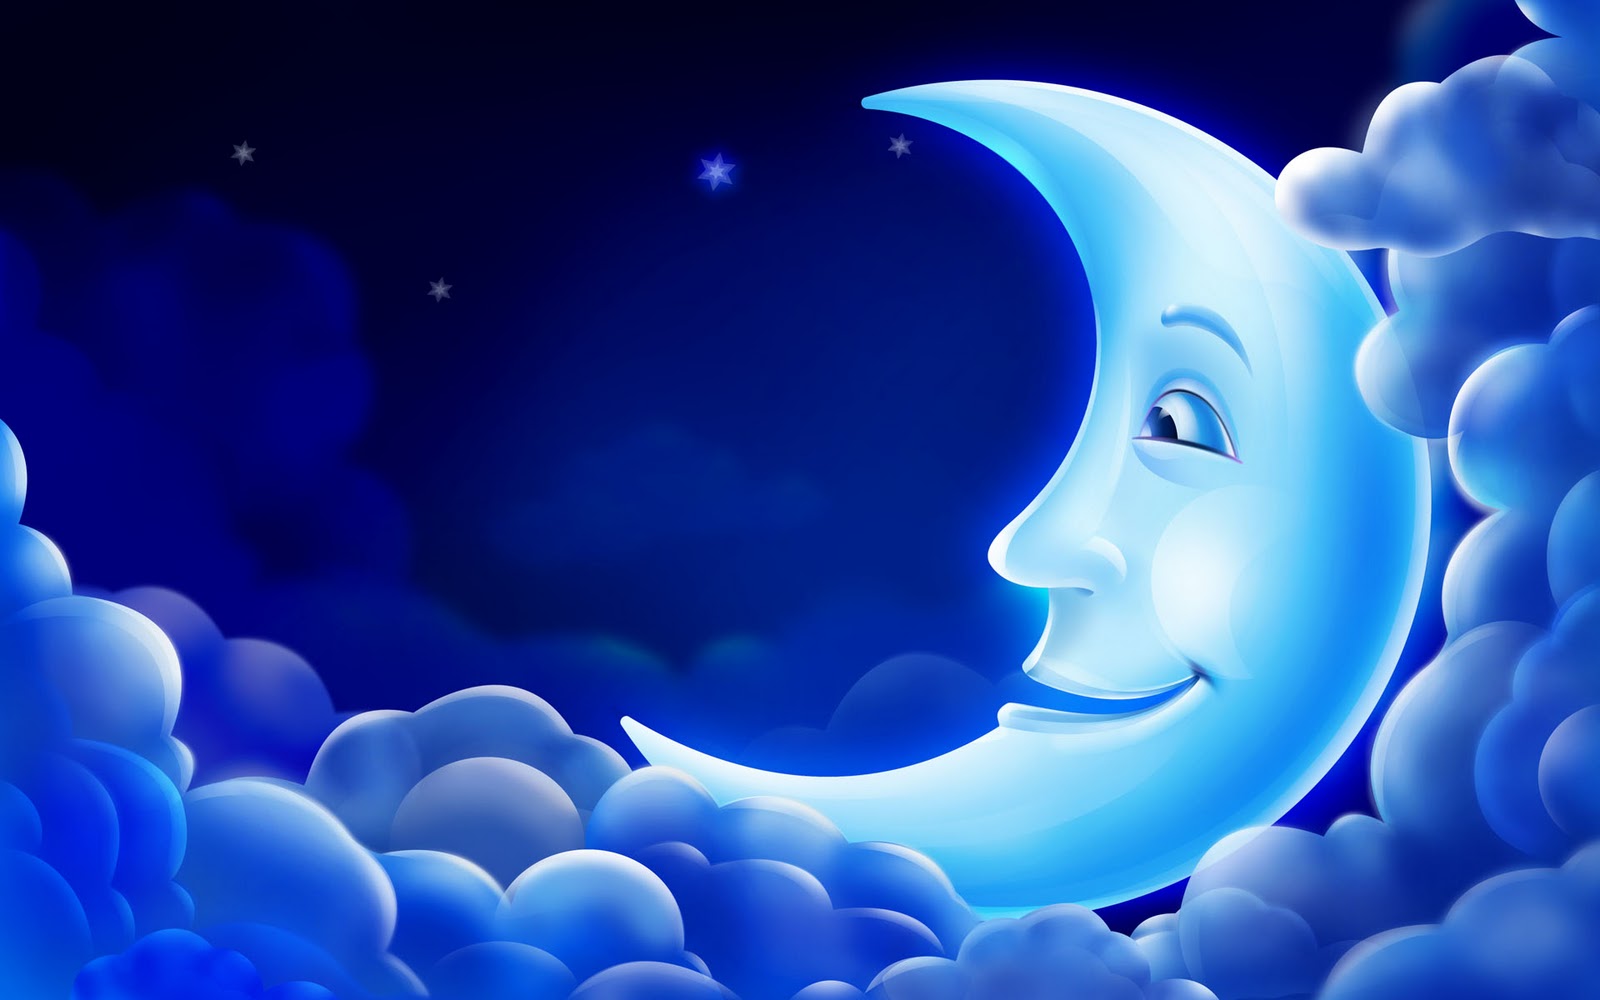 Moon Free Download 3D CG PC Wallpapers: 3D Computer GraphicsHD HQ ...